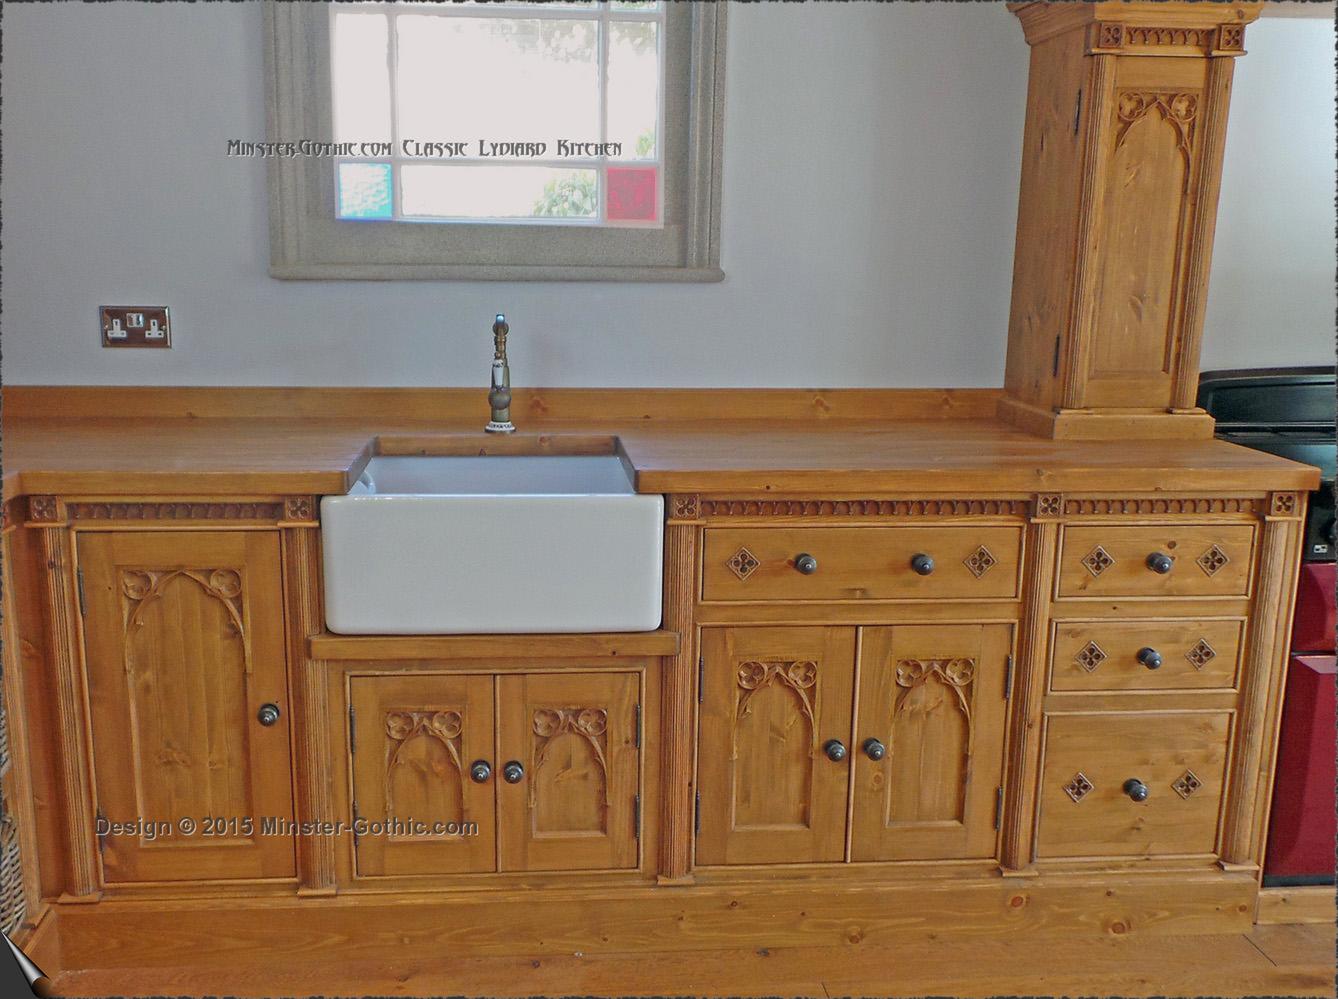 Minster Gothic kitchens. Free-standing or fitted. - Minster Gothic